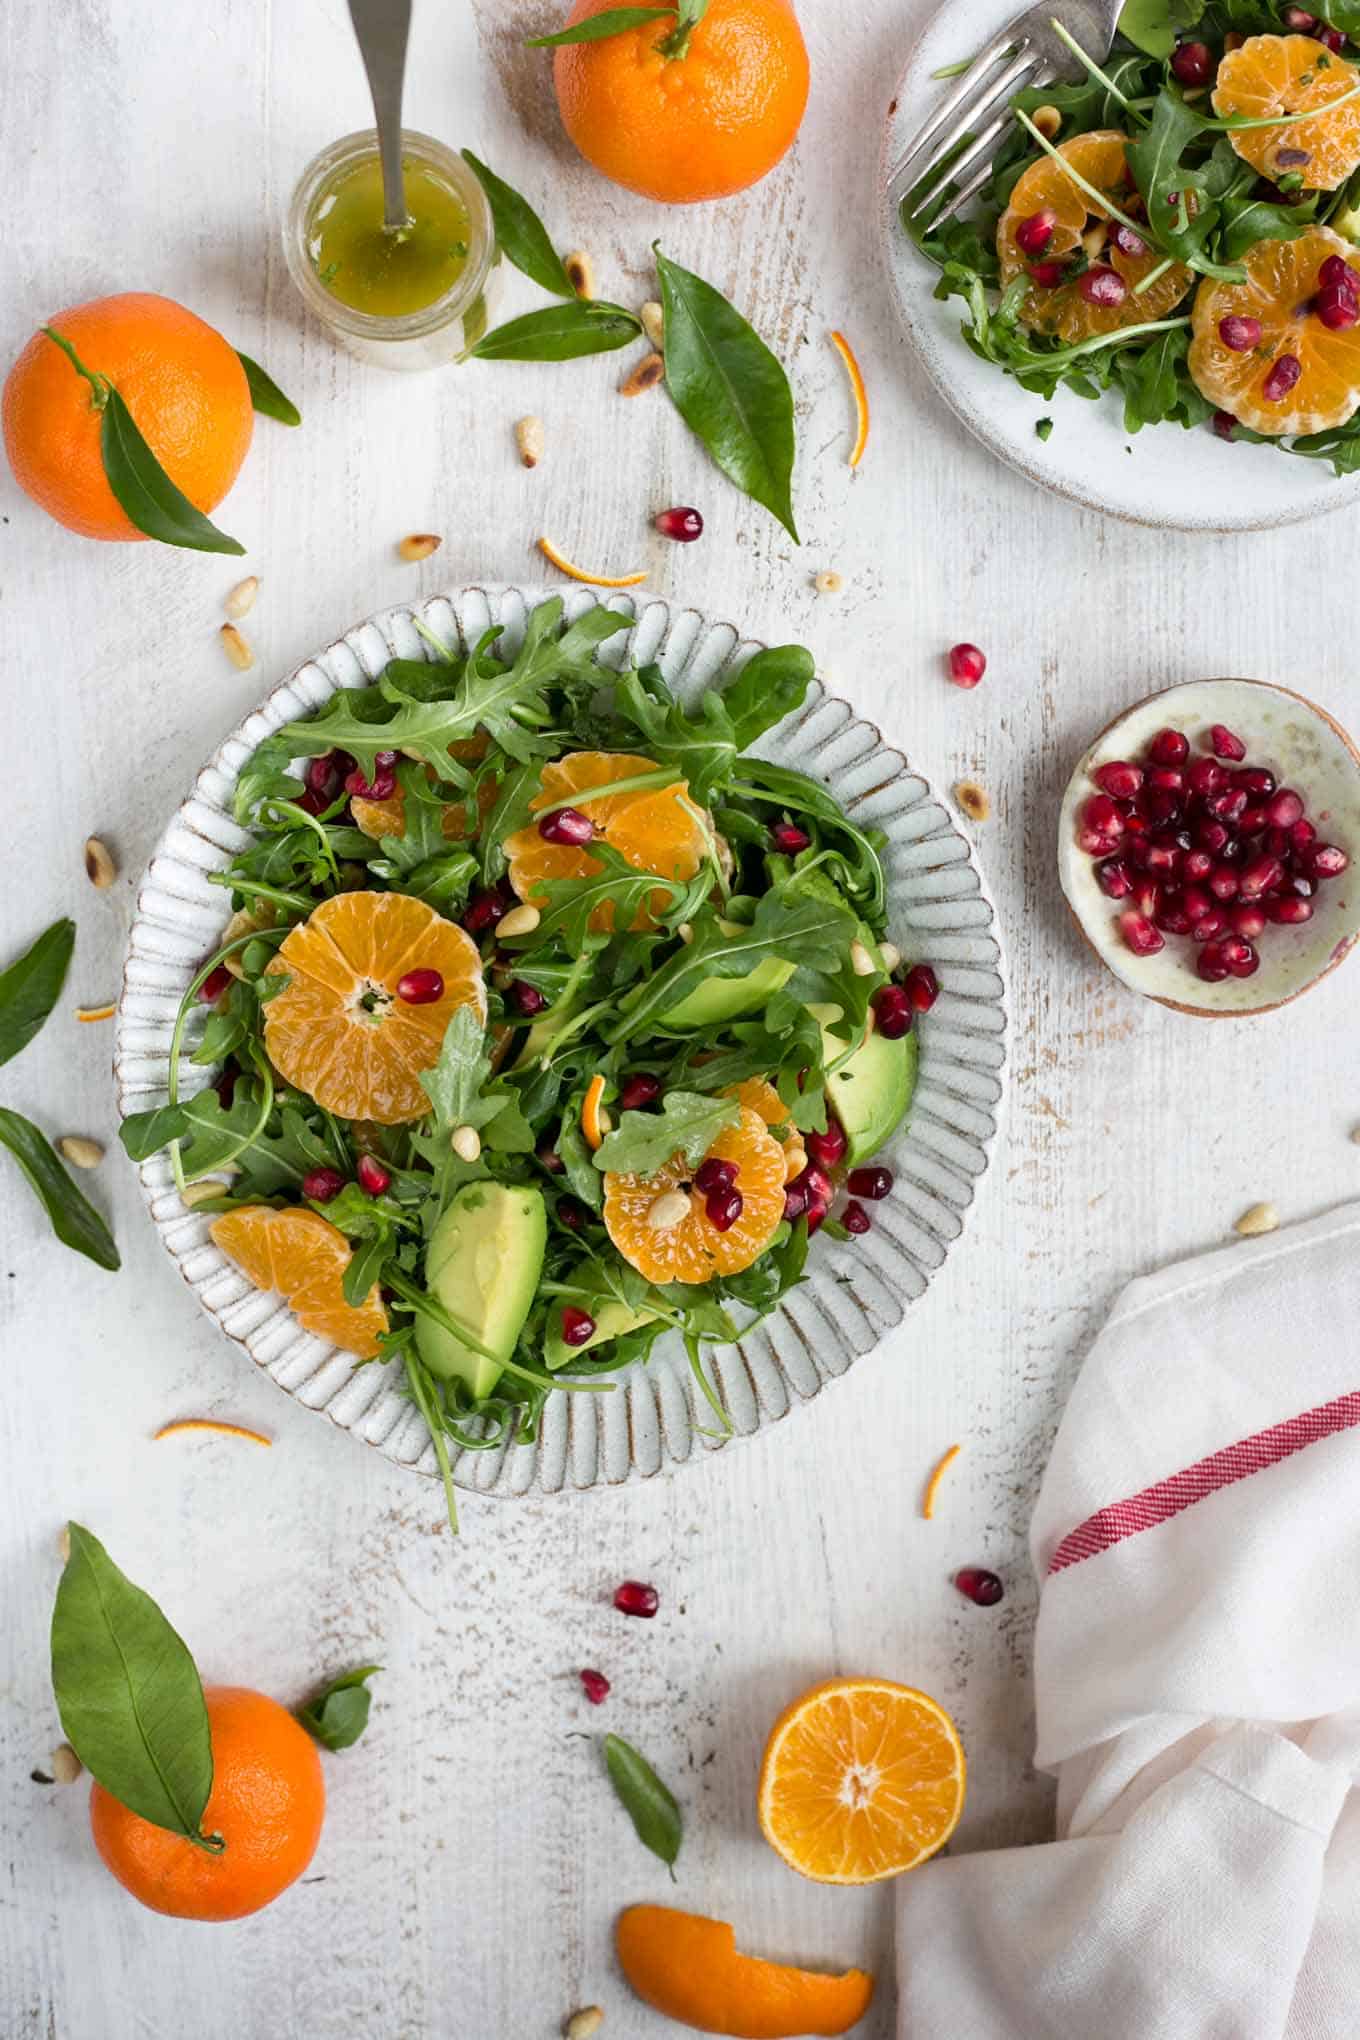 Refreshing avocado and clementine salad with juicy pomegranate and tangy dressing #vegan #salad #healthy | via @annabanana.co